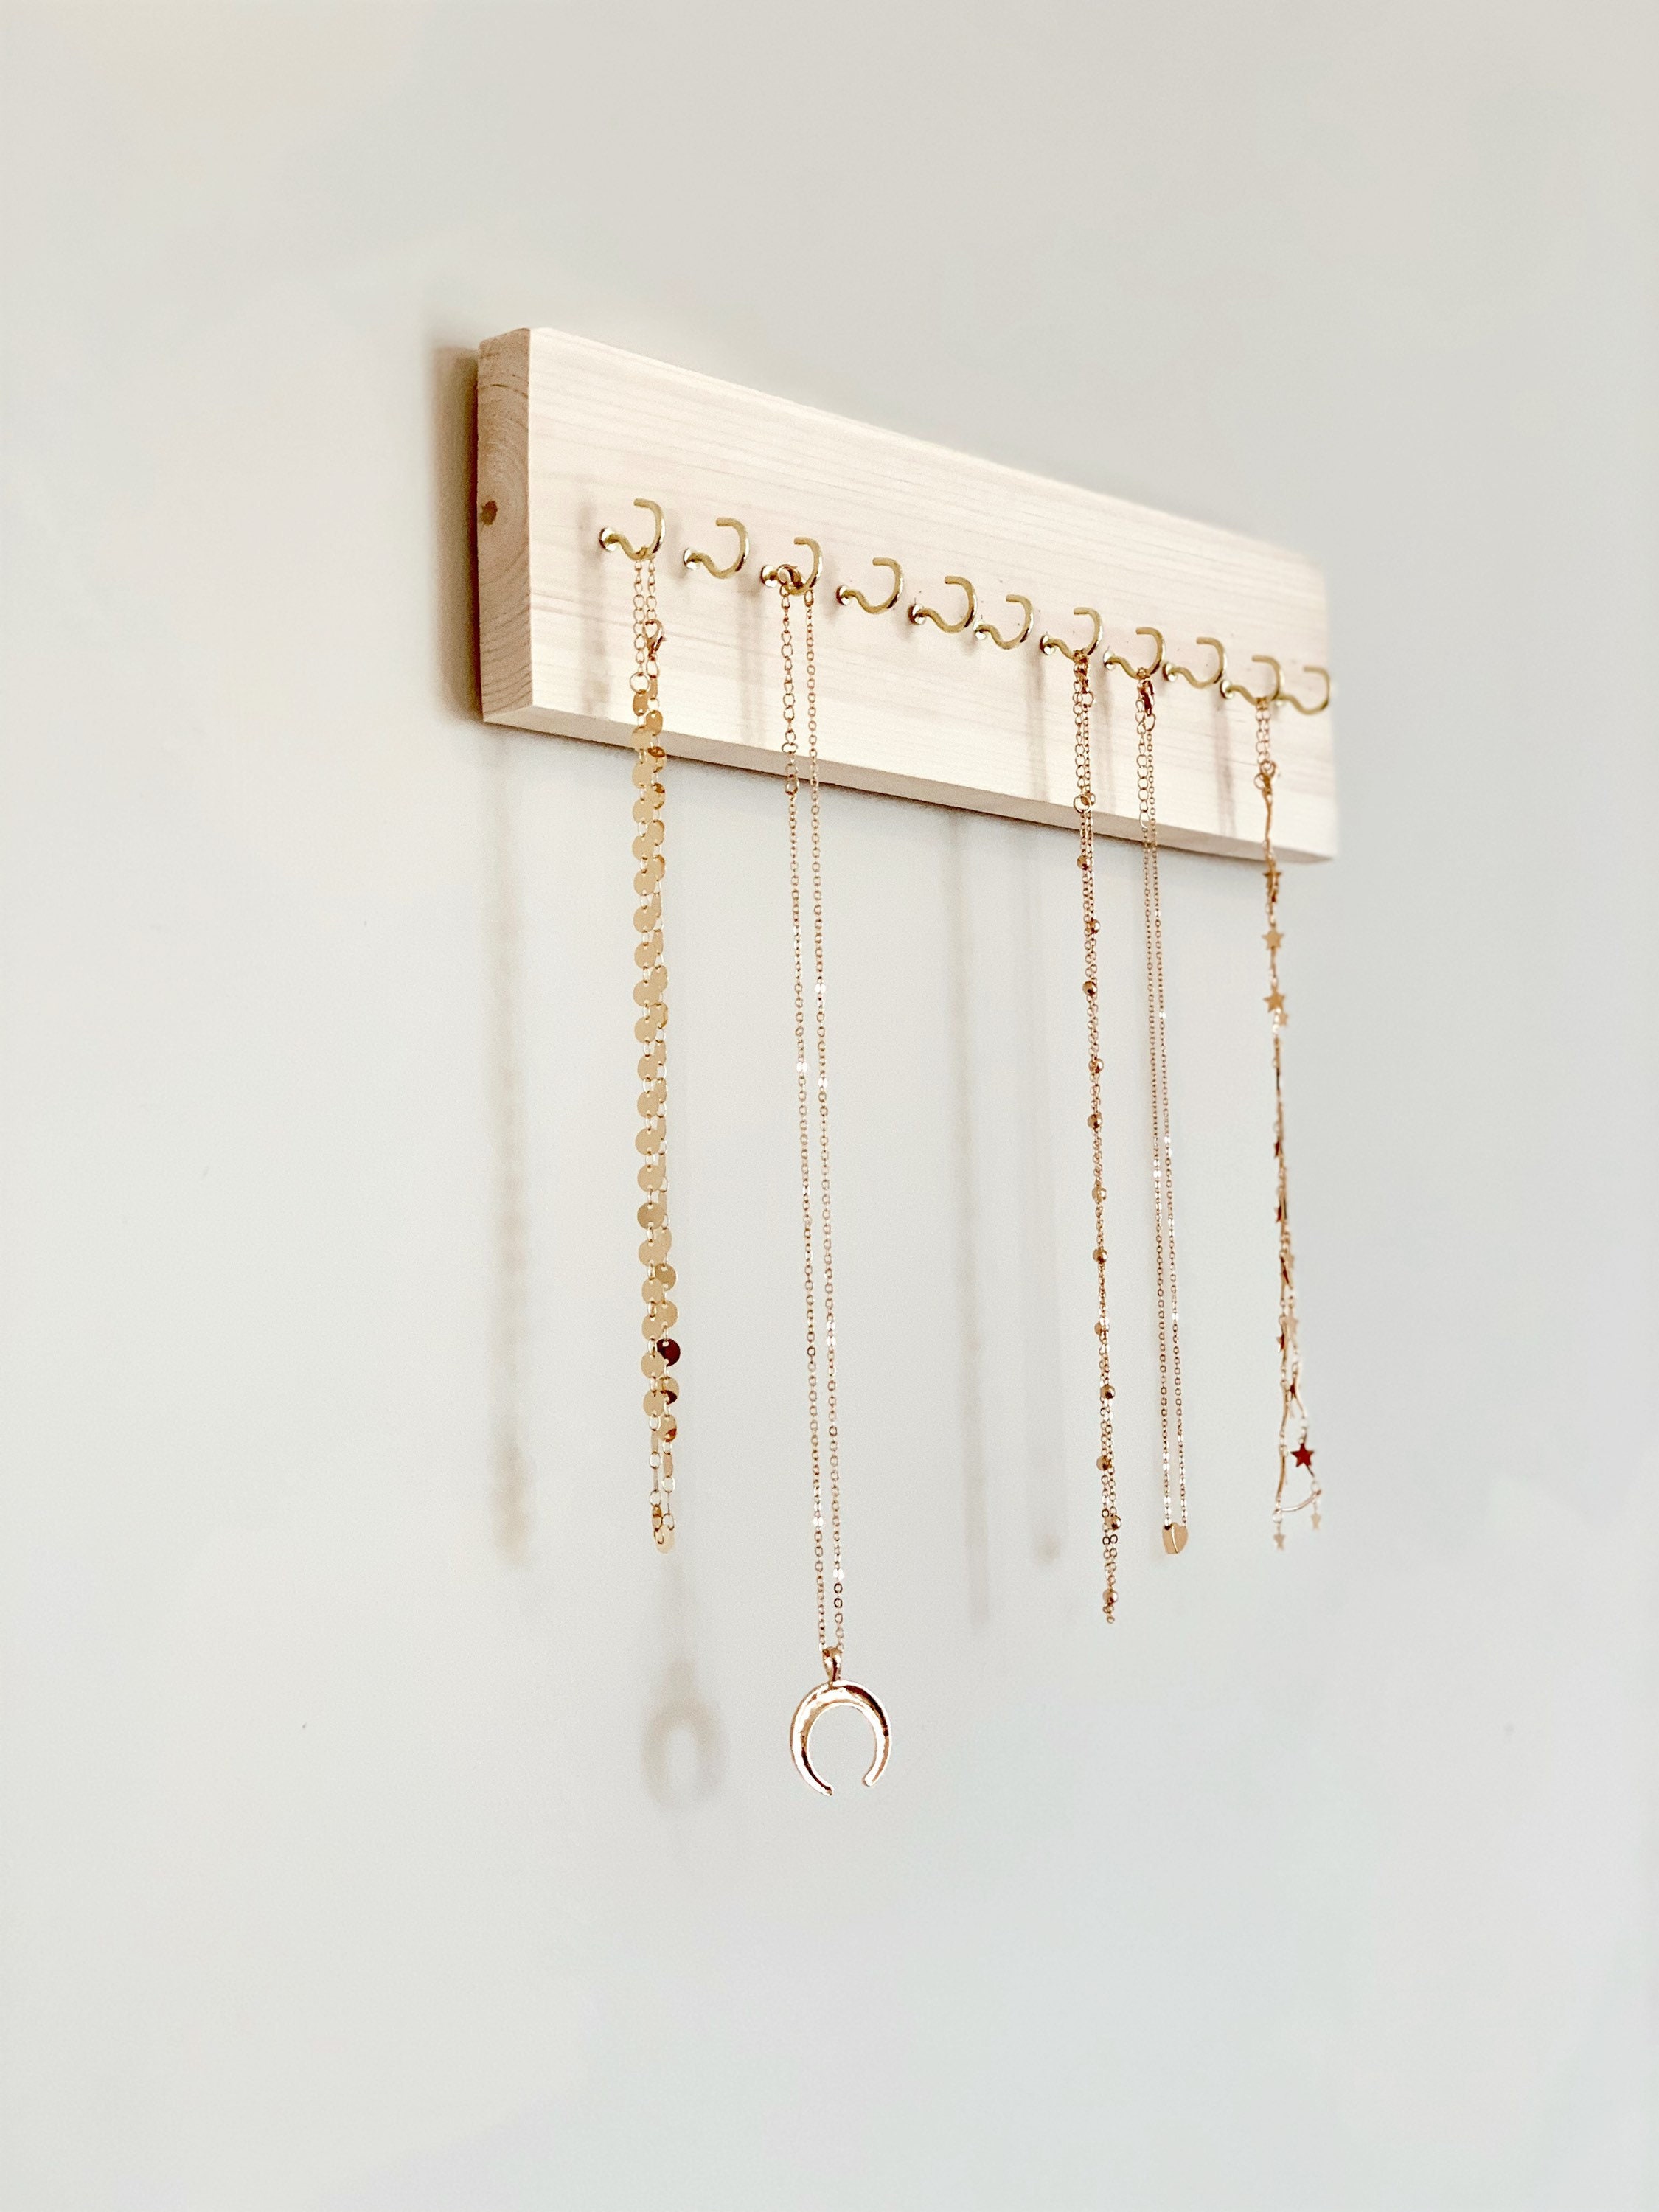 Necklace Wall Hooks -  Canada